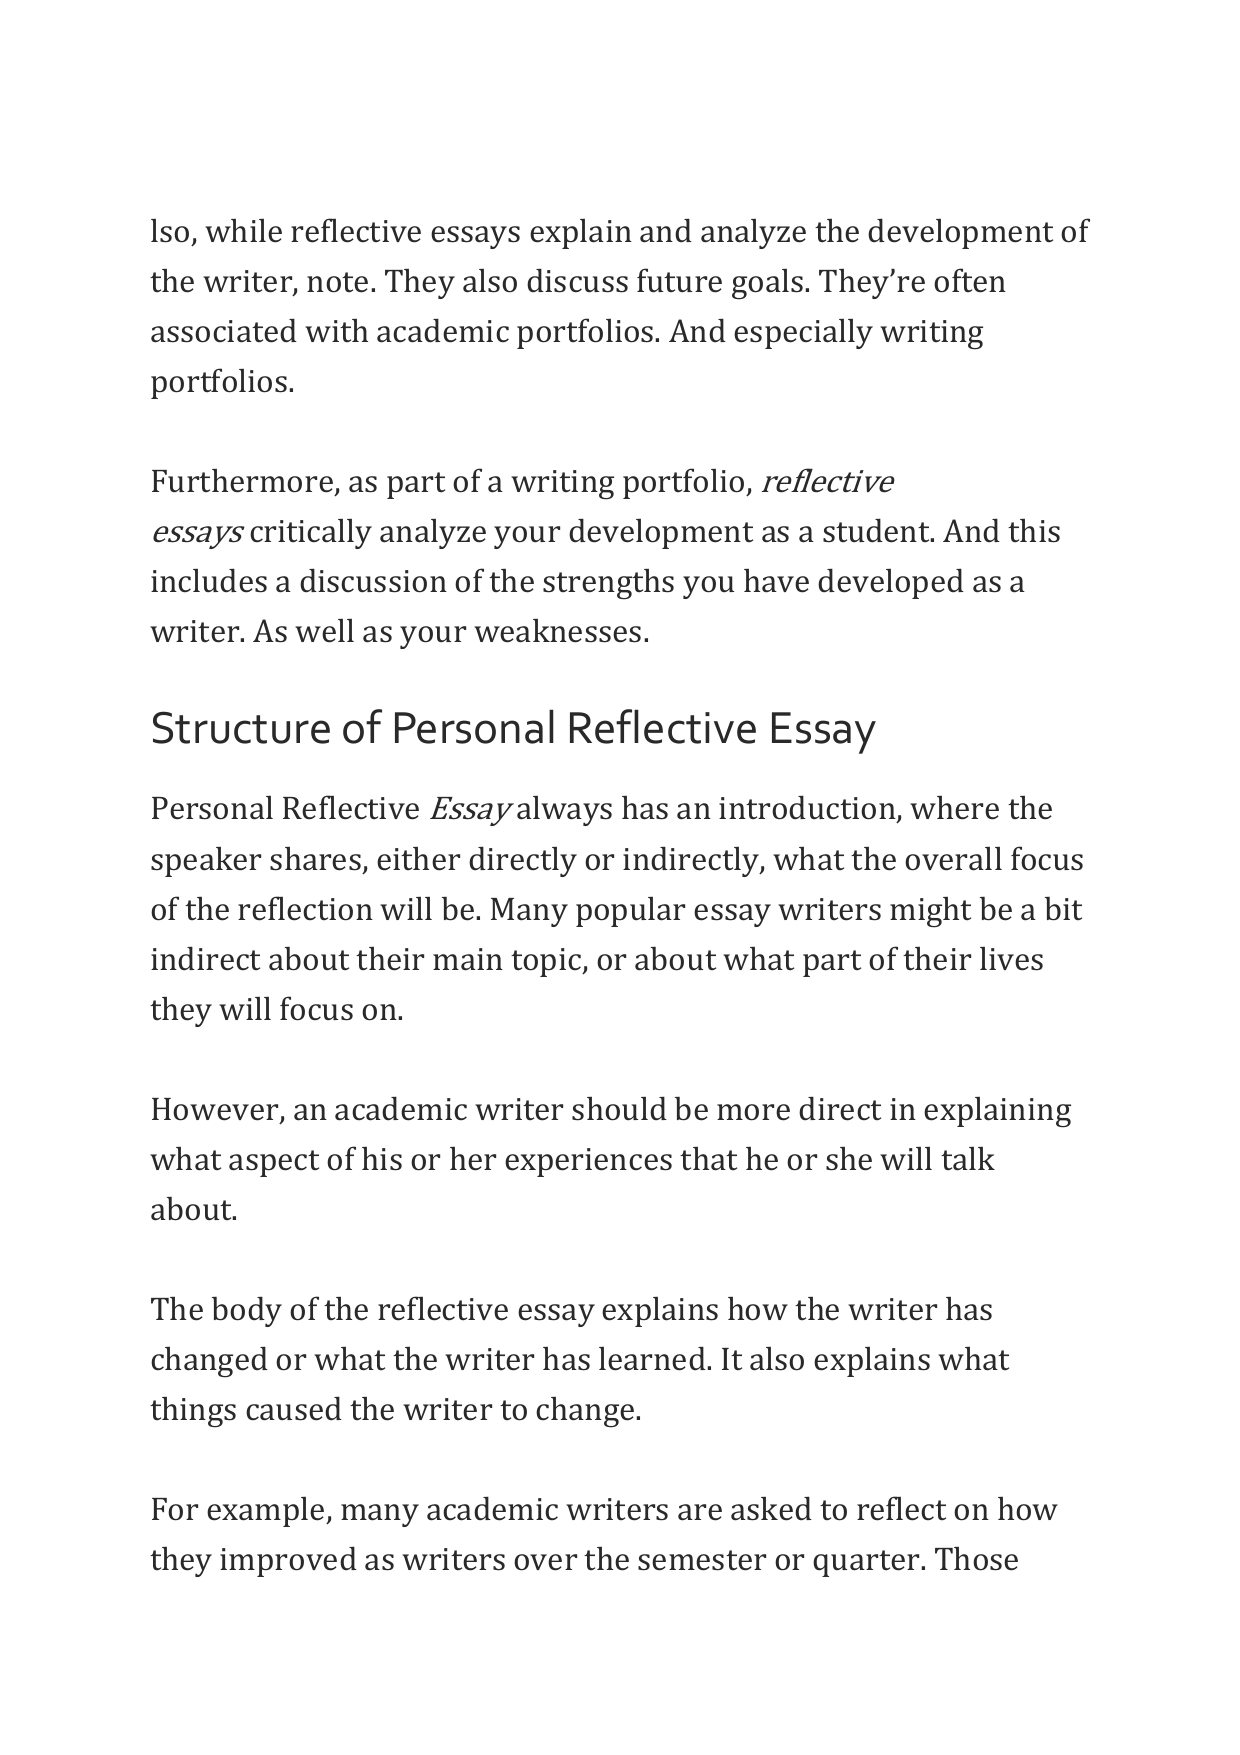 Who is Your essay writer Customer?